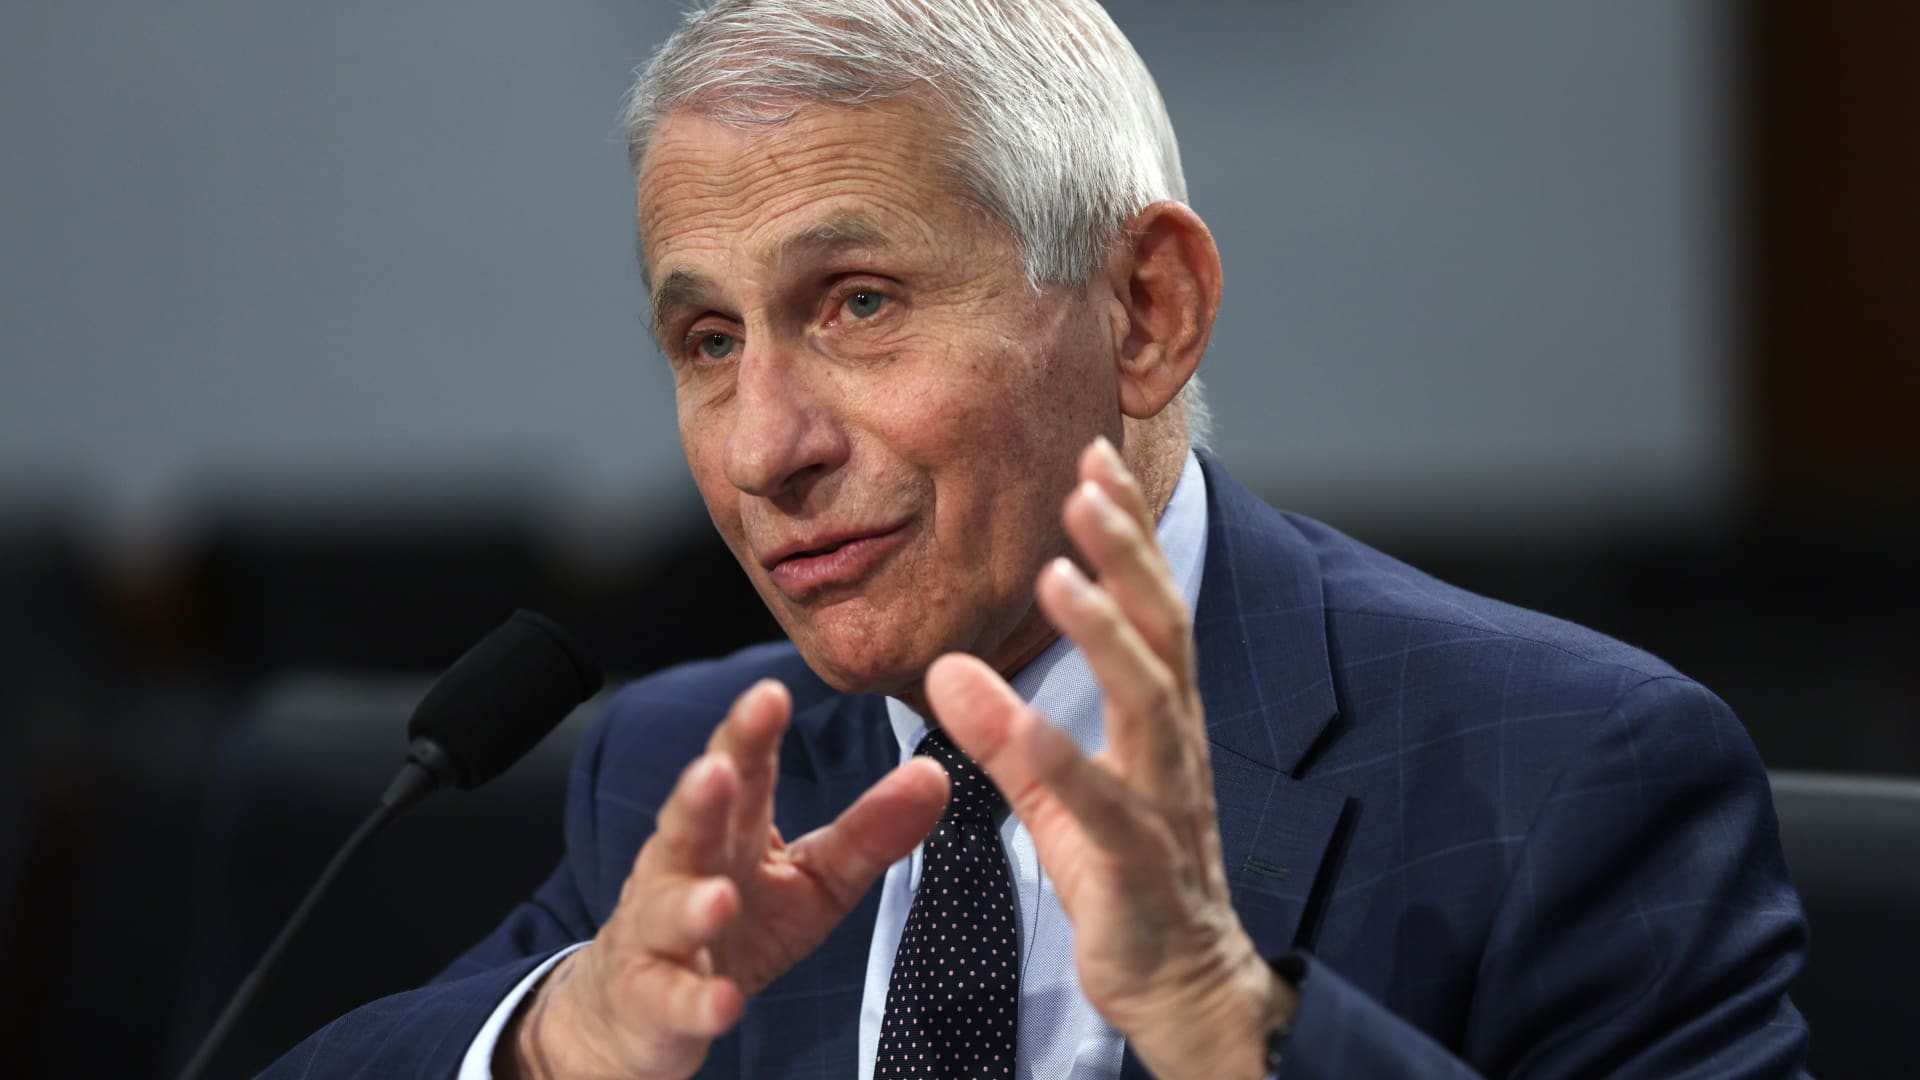 Dr. Fauci: A new, more dangerous Covid variant could emerge this winter